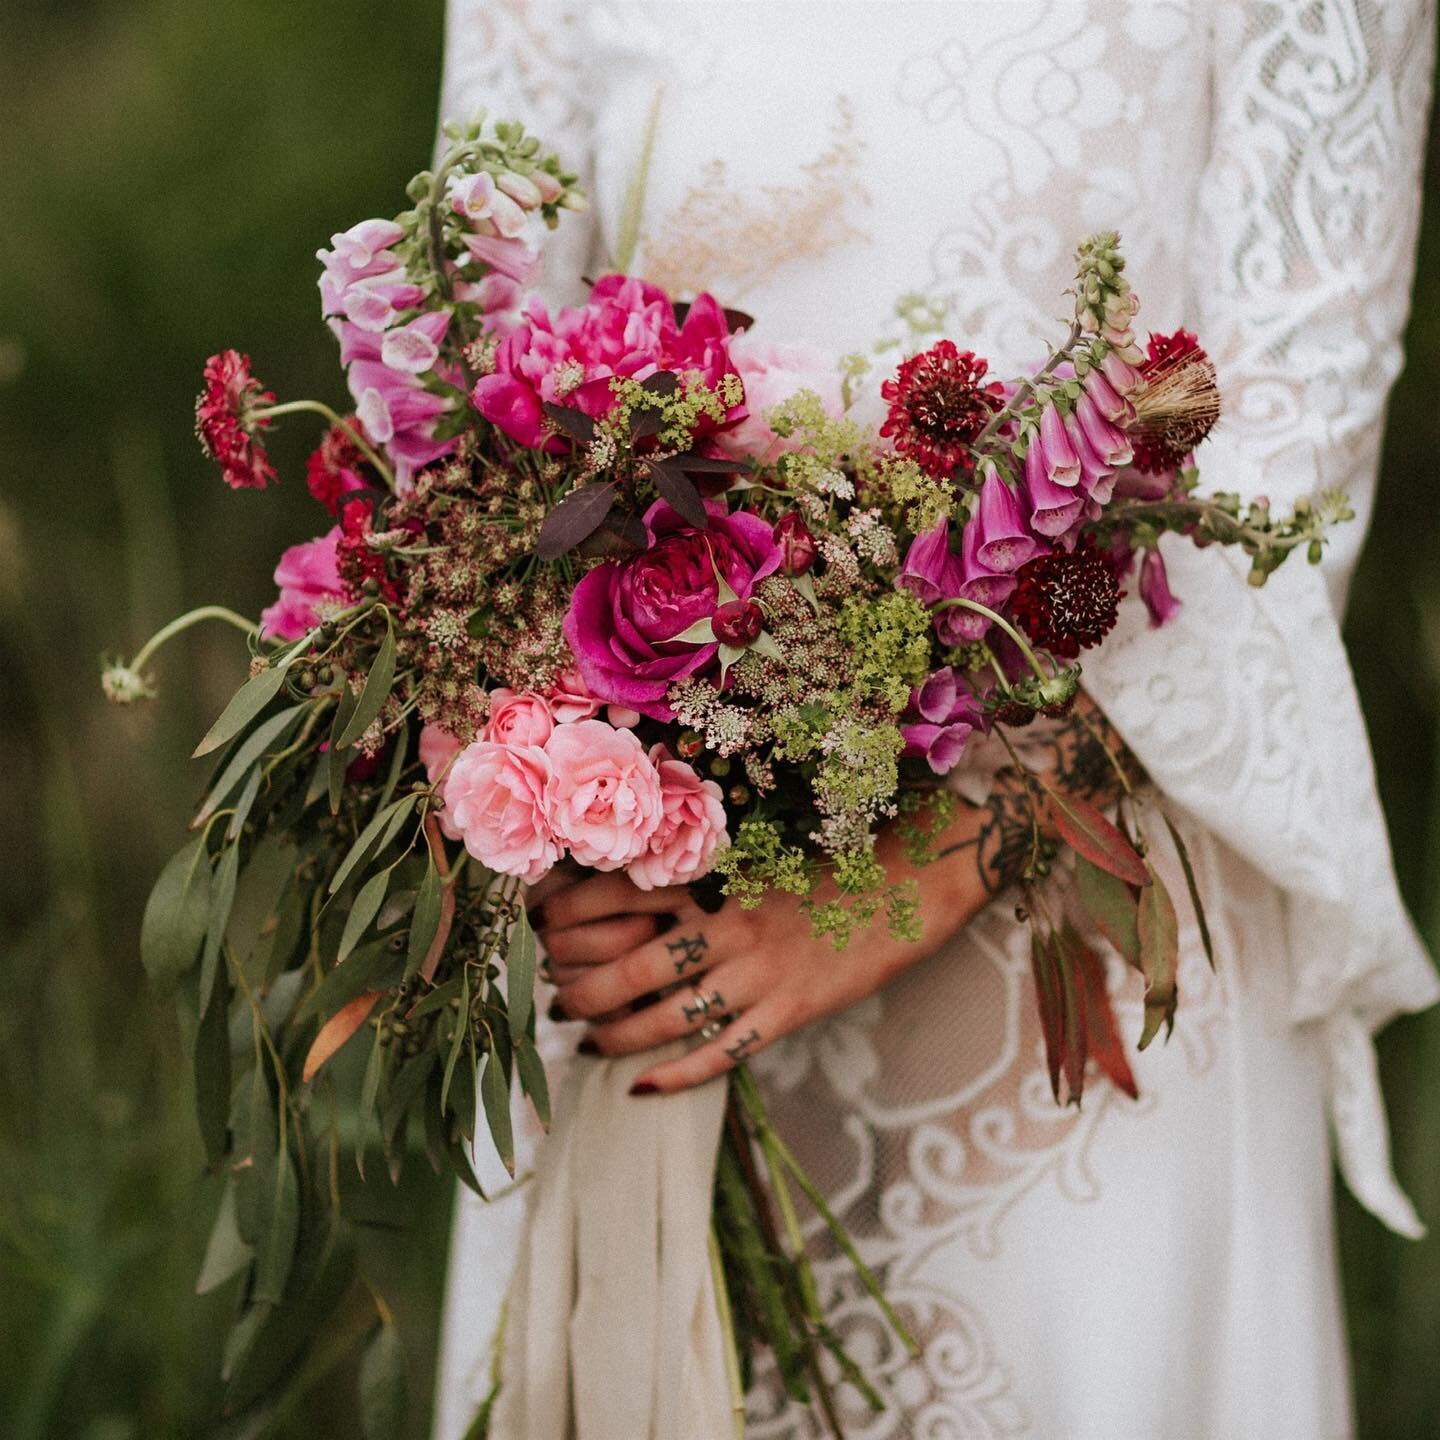 This is one of my all time favorite bouquets I&rsquo;ve made. This is probably because of amazing @westcoastlife who took the photos and @saintsavvy and her sexy hand tats for holding it! But it&rsquo;s always all about texture for me and this bouque